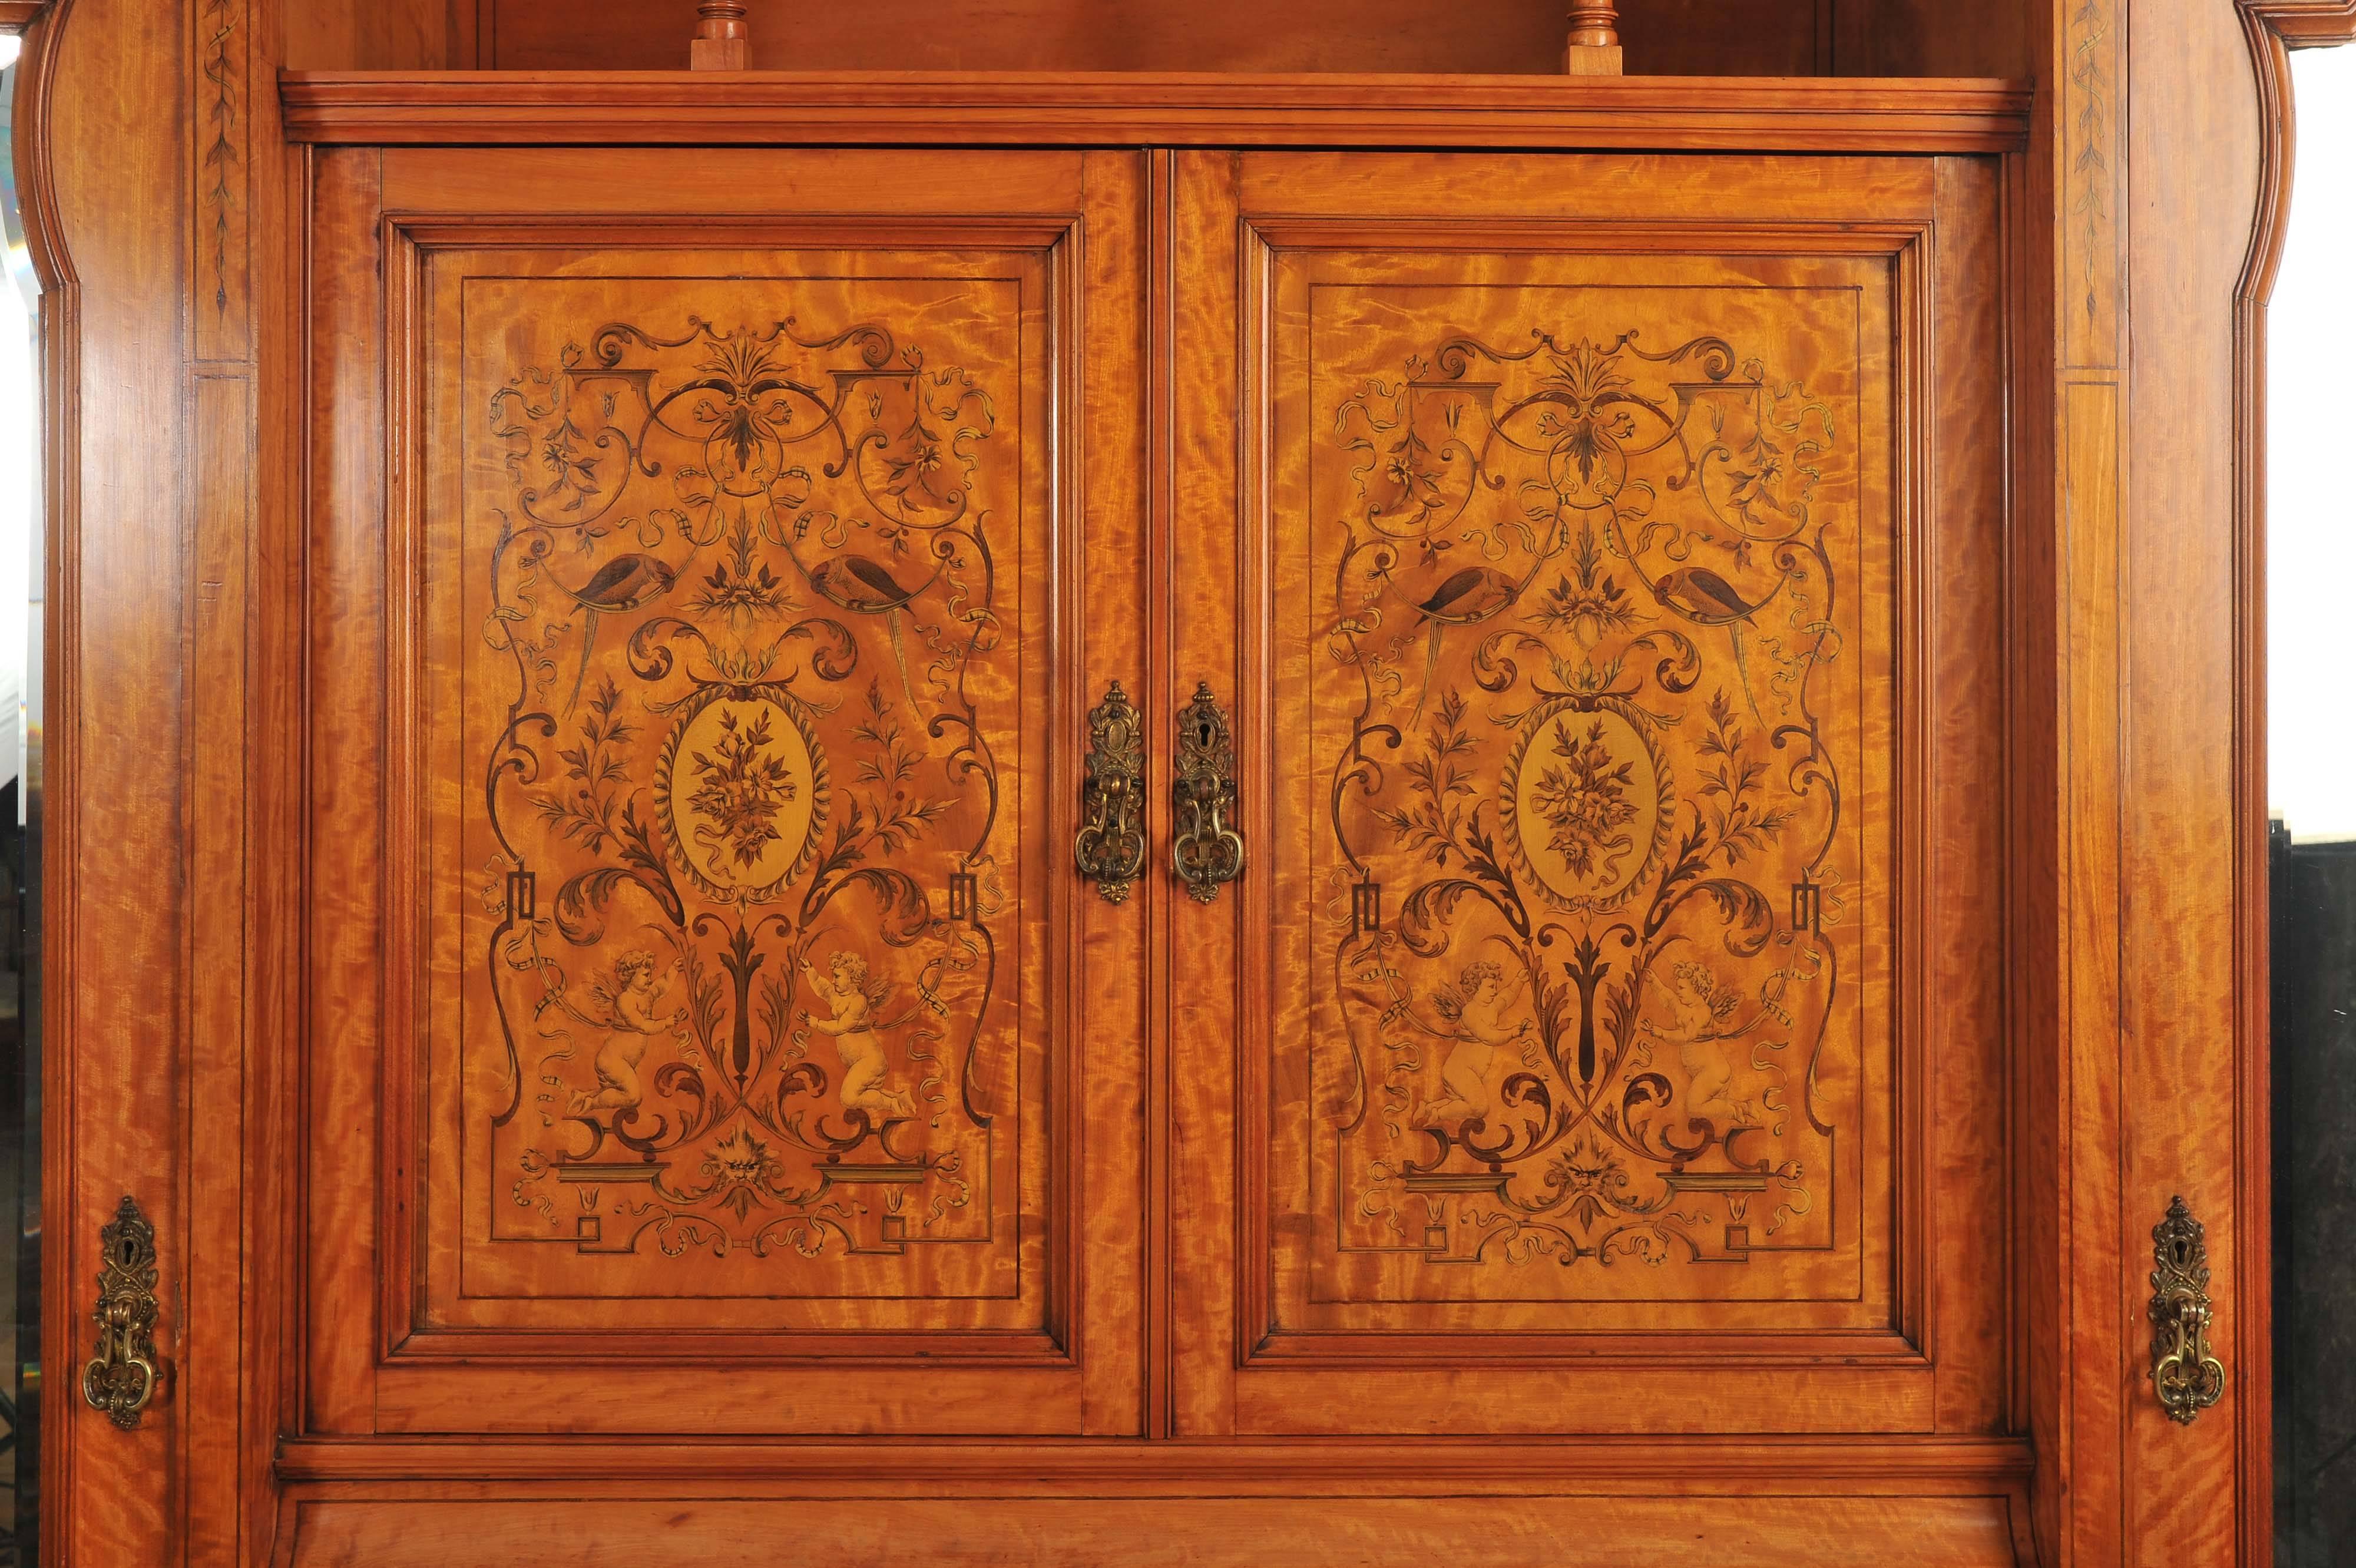 This magnificent late 19th century English satinwood wardrobe features an ornate inlay work of floral, cupid and parrot designs surrounded by swags and scrolls. The wardrobe is grand in size and of exceptional quality. Each side has hooks for